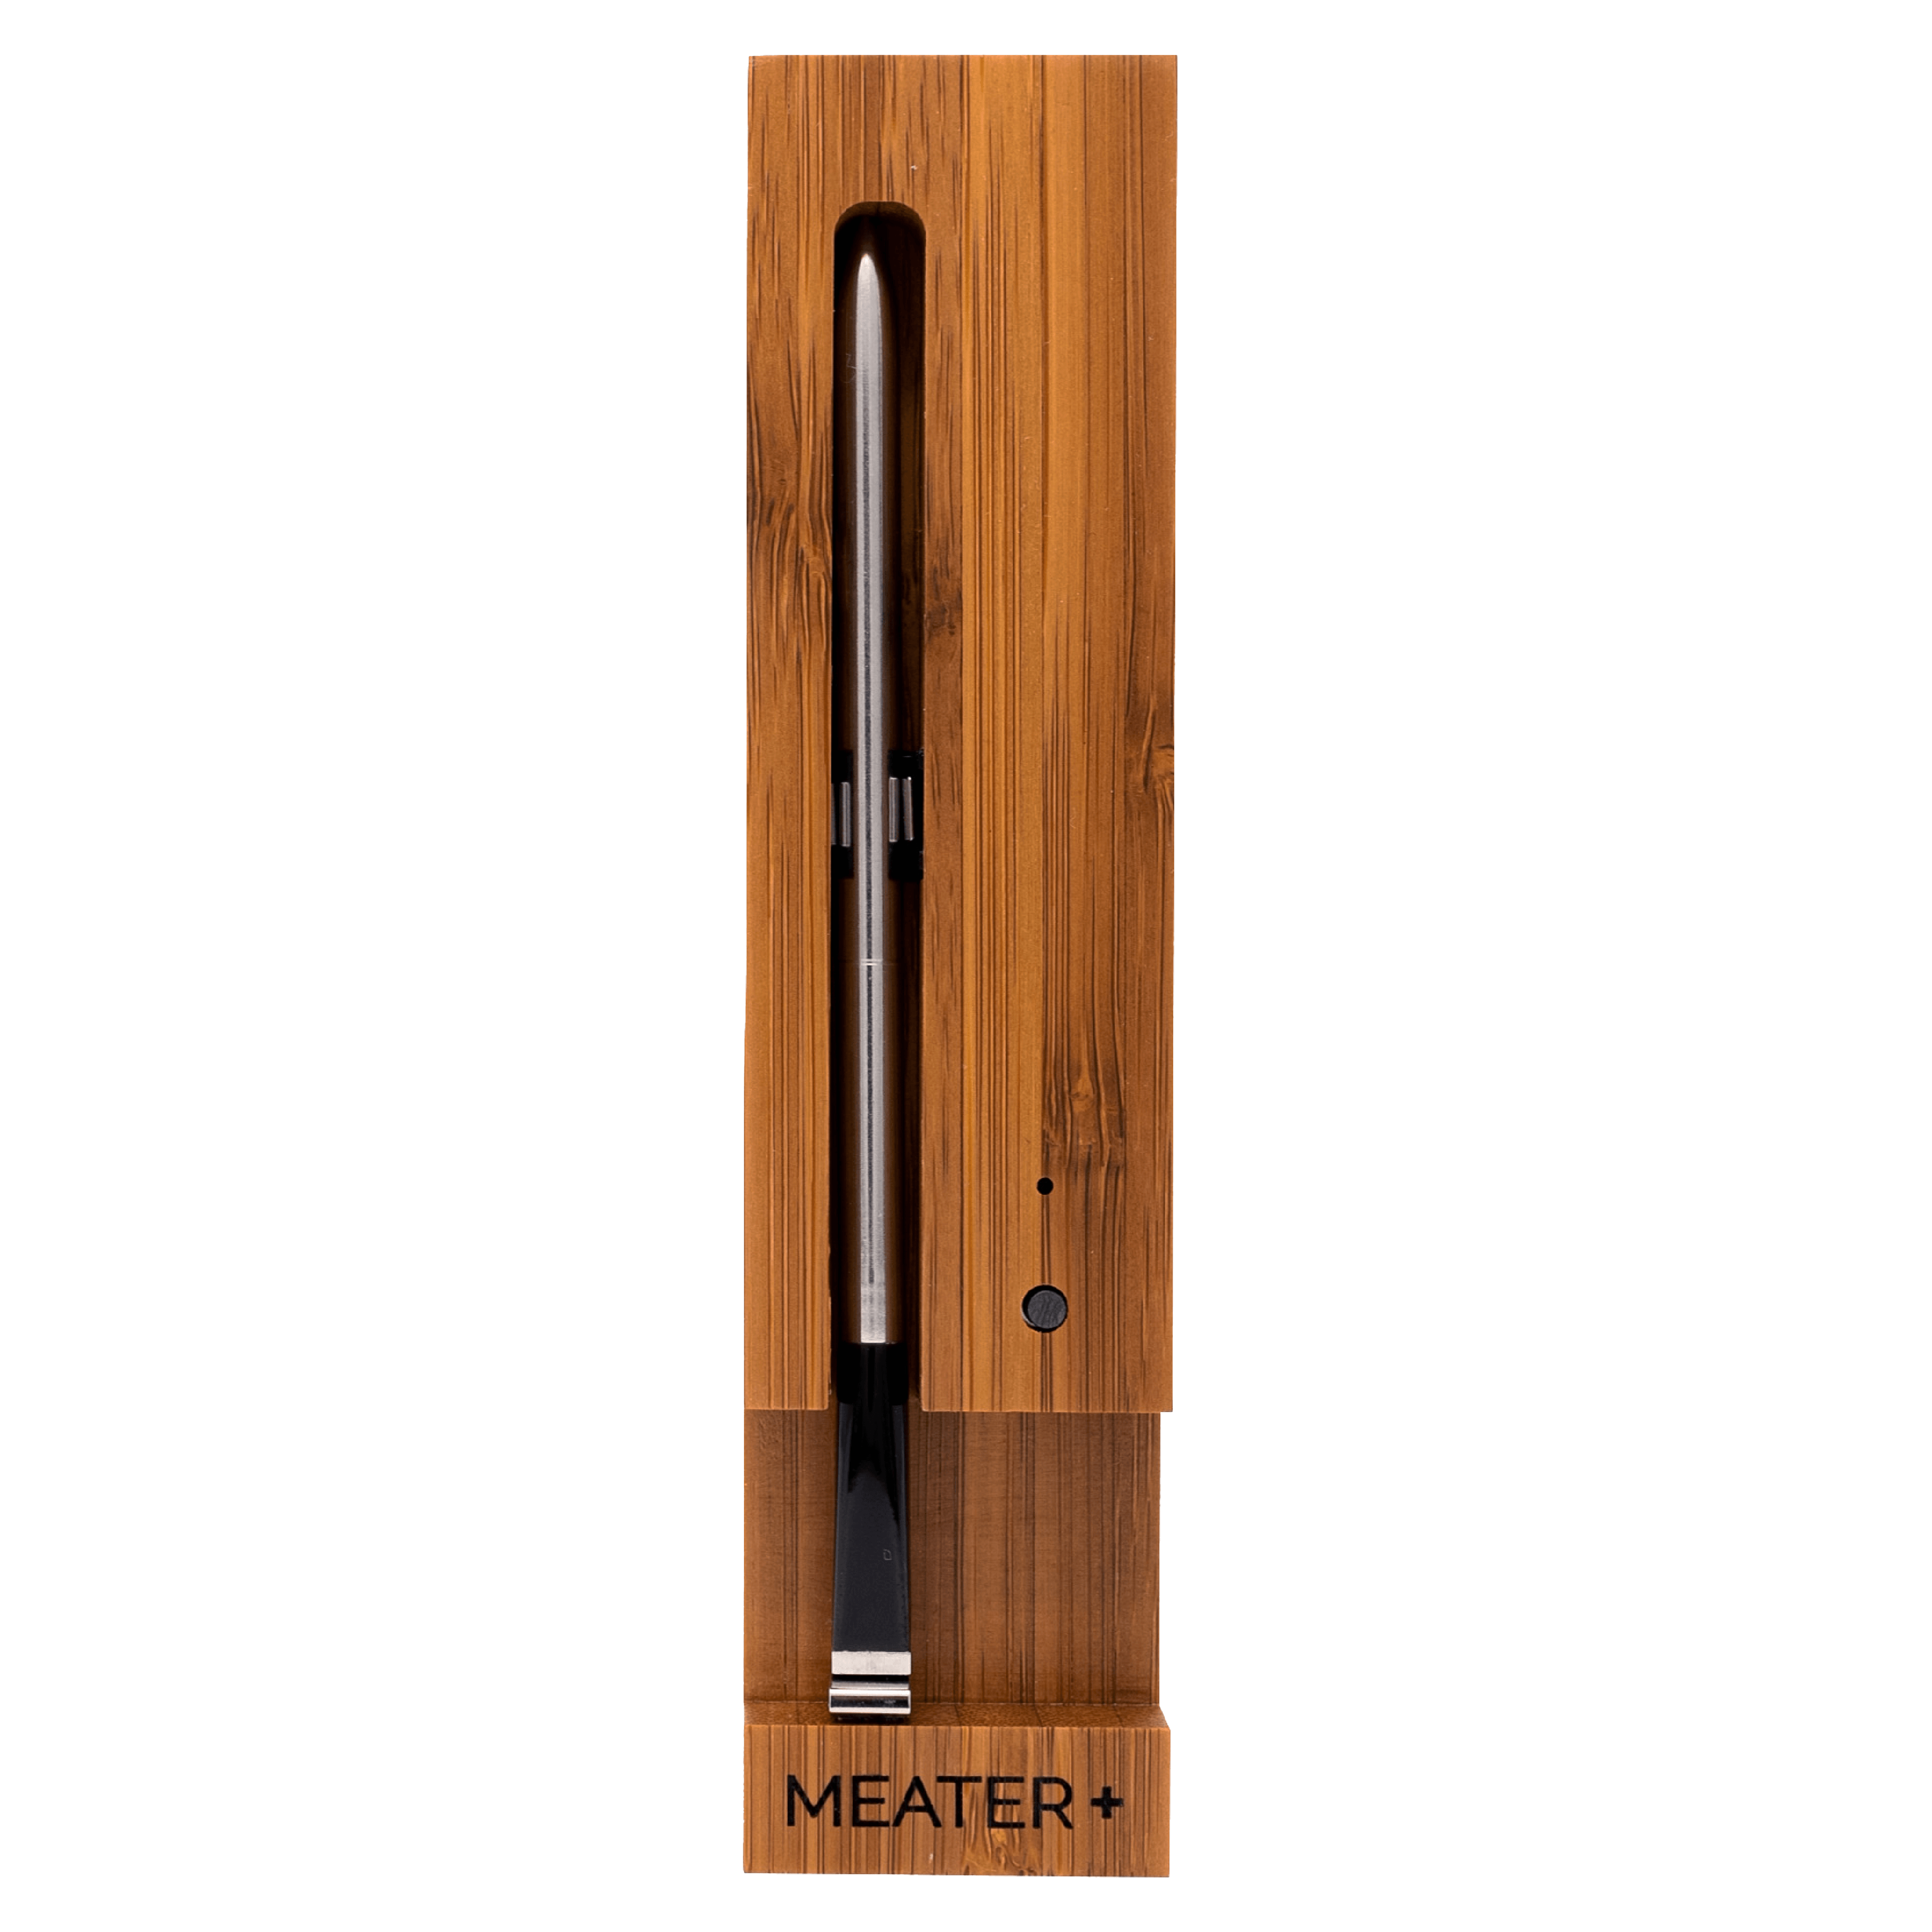 The MEATER Plus Thermometer: A Comprehensive Review - Also The Crumbs Please